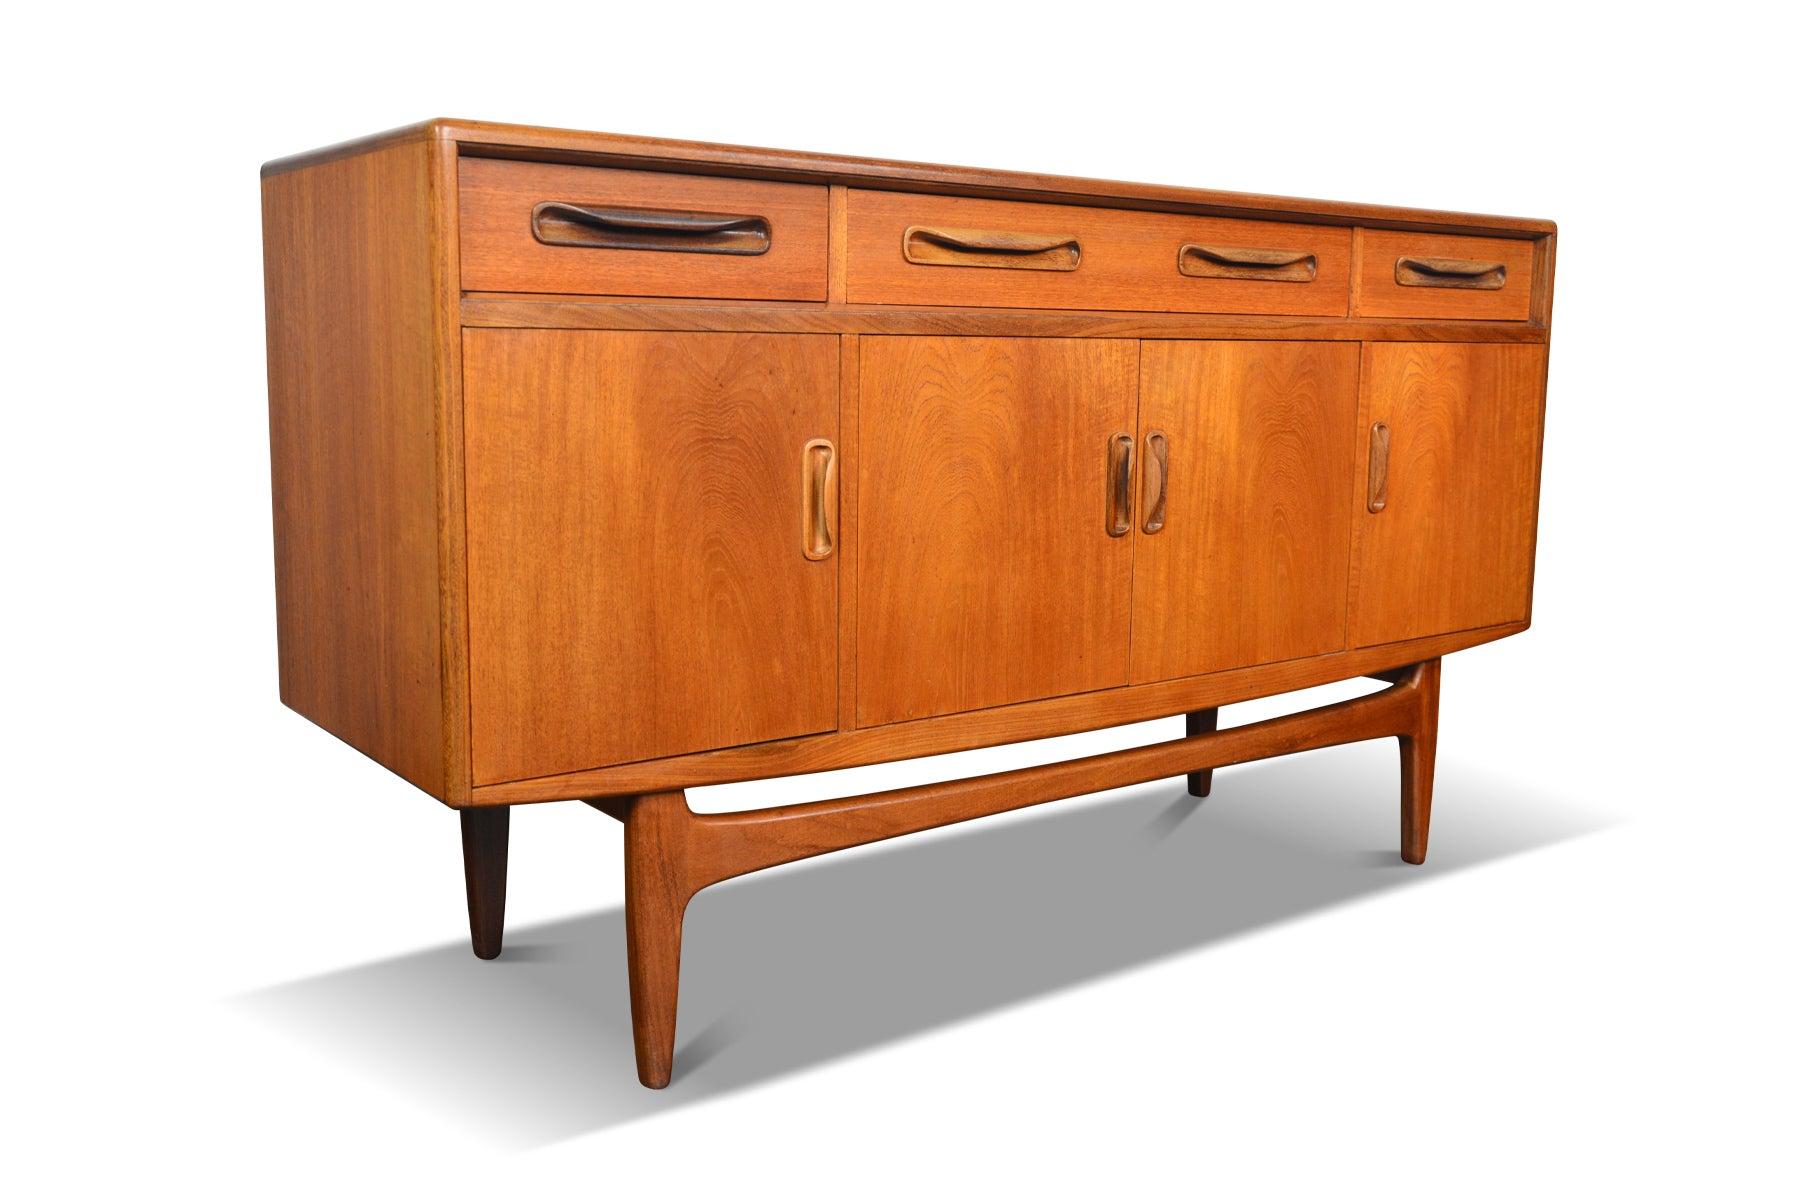 Origin: England
Designer: Victor B. Wilkins
Manufacturer: G Plan
Era: 1960s
Materials: Teak
Measurements: 60? wide x 18? deep x 33? tall

Condition: In excellent original condition with typical wear for its vintage. Price includes restoration